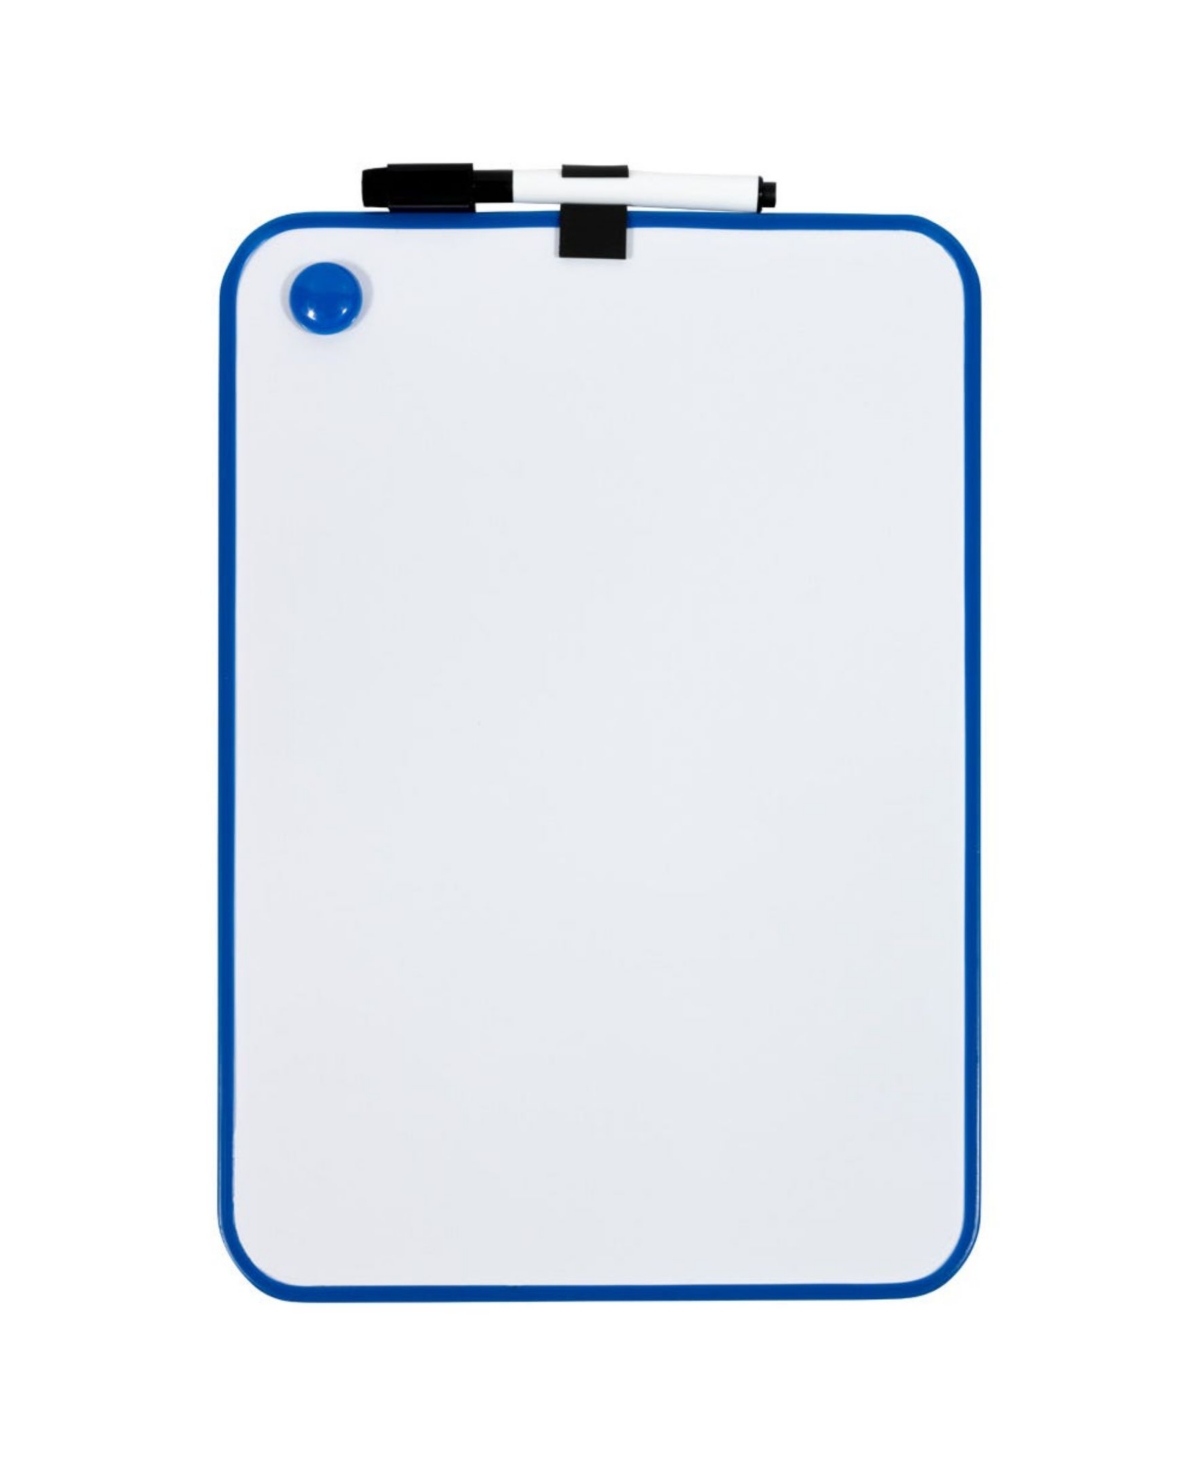 Magnetic Dry Erase Foam Boards with Board Marker - White